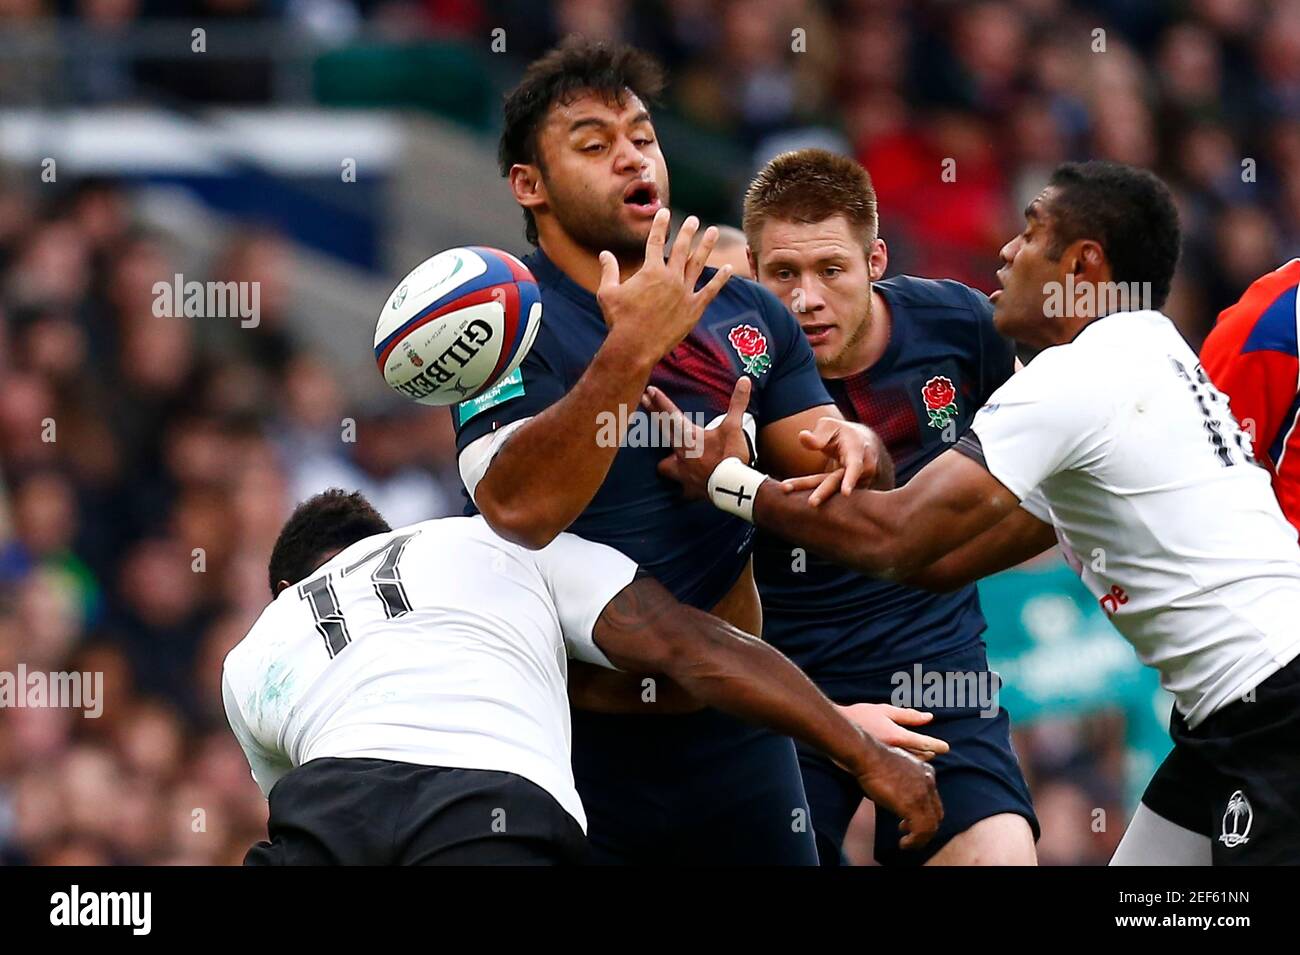 Britain Rugby Union - England v Fiji - 2016 Old Mutual Wealth Series - Twickenham Stadium, London, England - 19/11/16 England's Billy Vunipola in action  Reuters / Andrew Winning Livepic EDITORIAL USE ONLY. Stock Photo